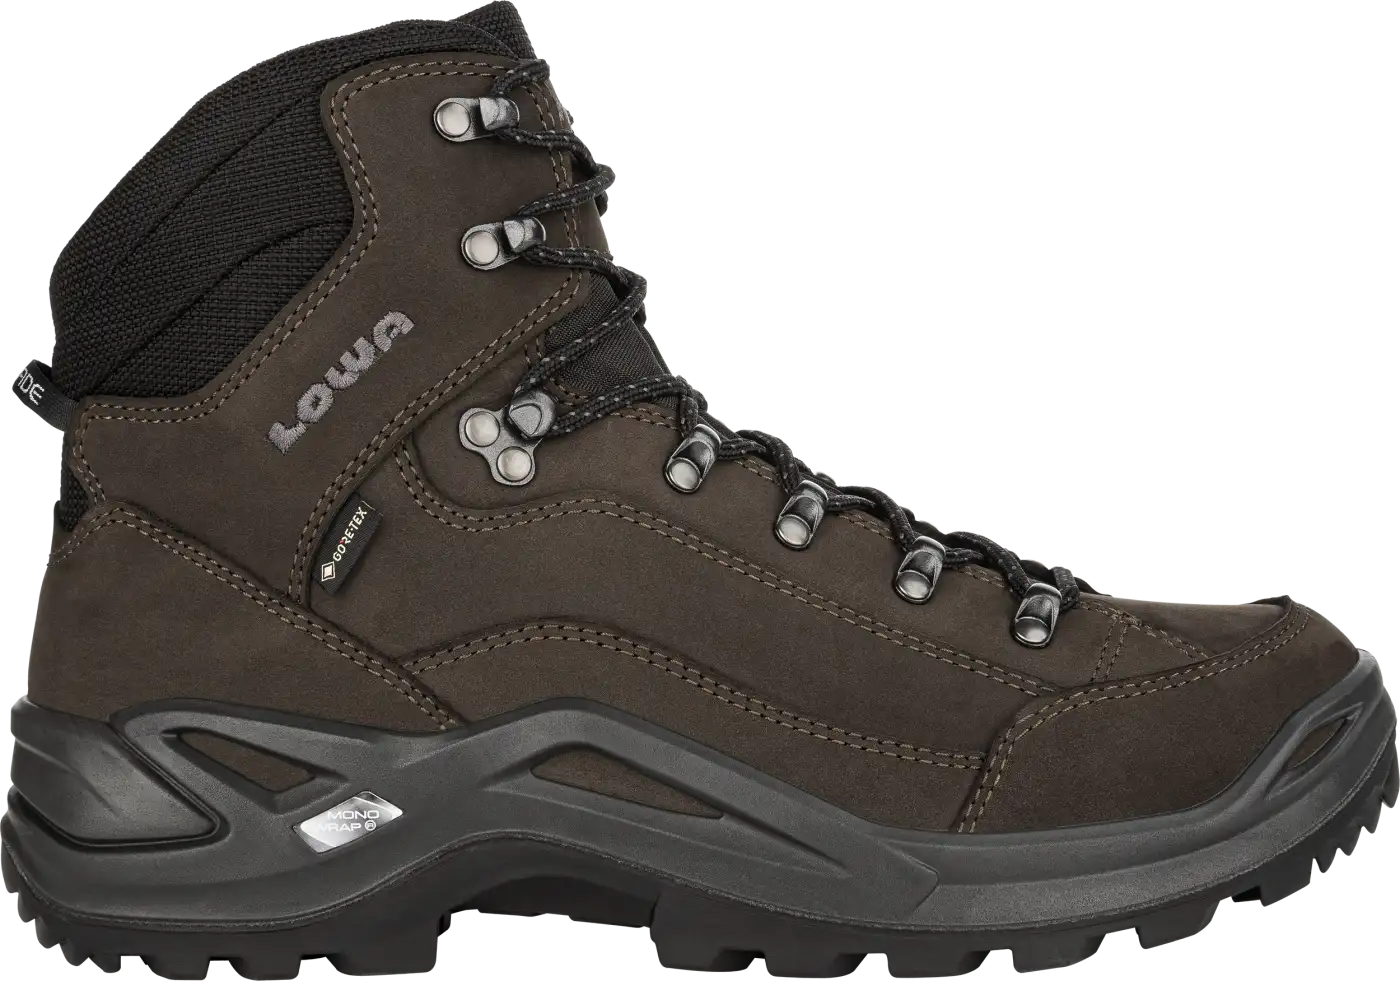 Buty LOWA Renegade GTX mid 310945 4309_renegade gtx mid_2021_outer